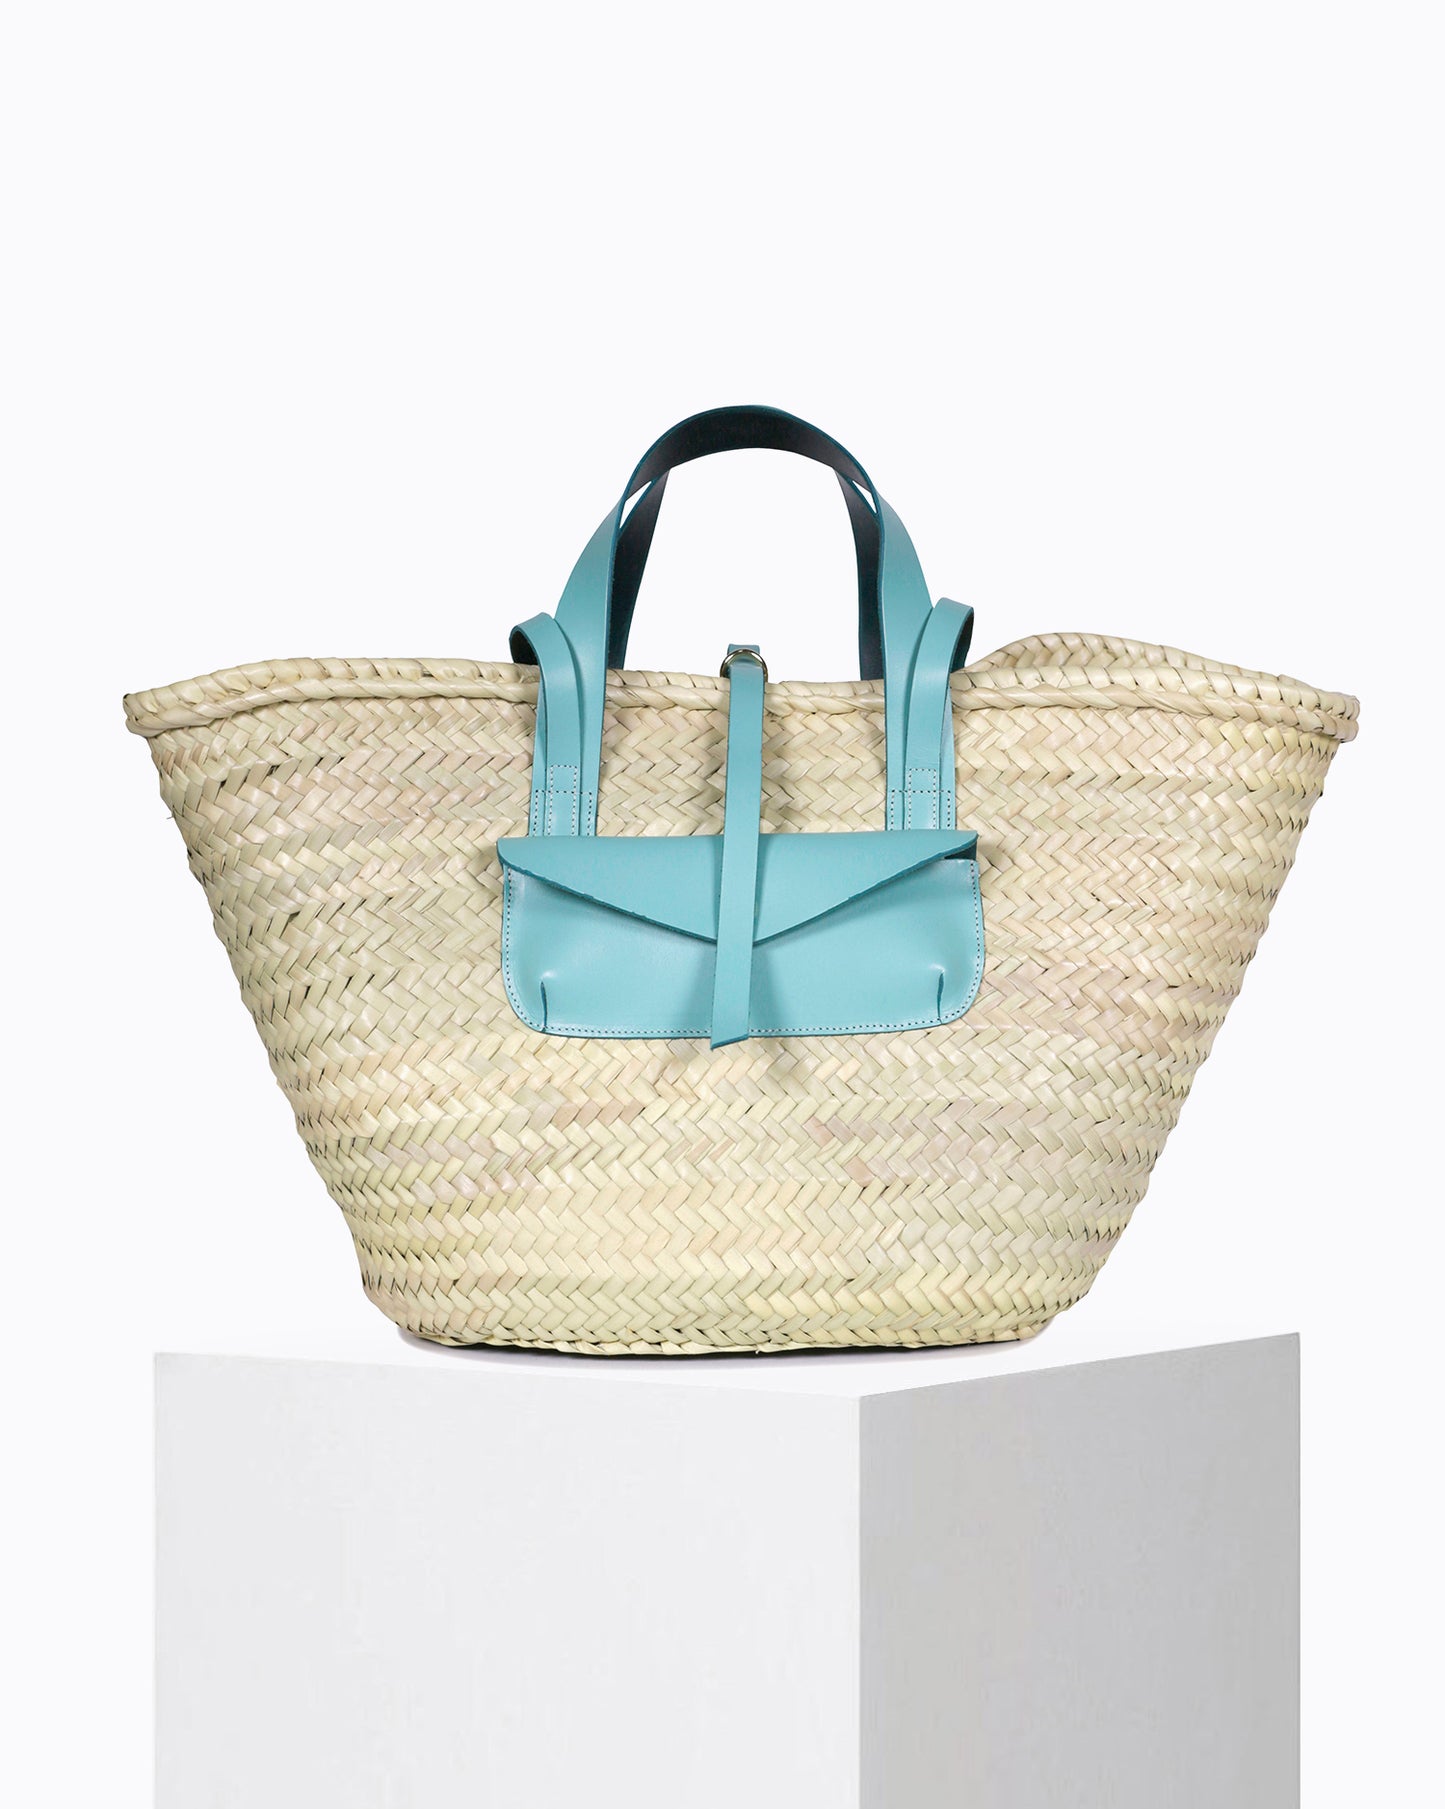 The Grand Panier in Turquoise